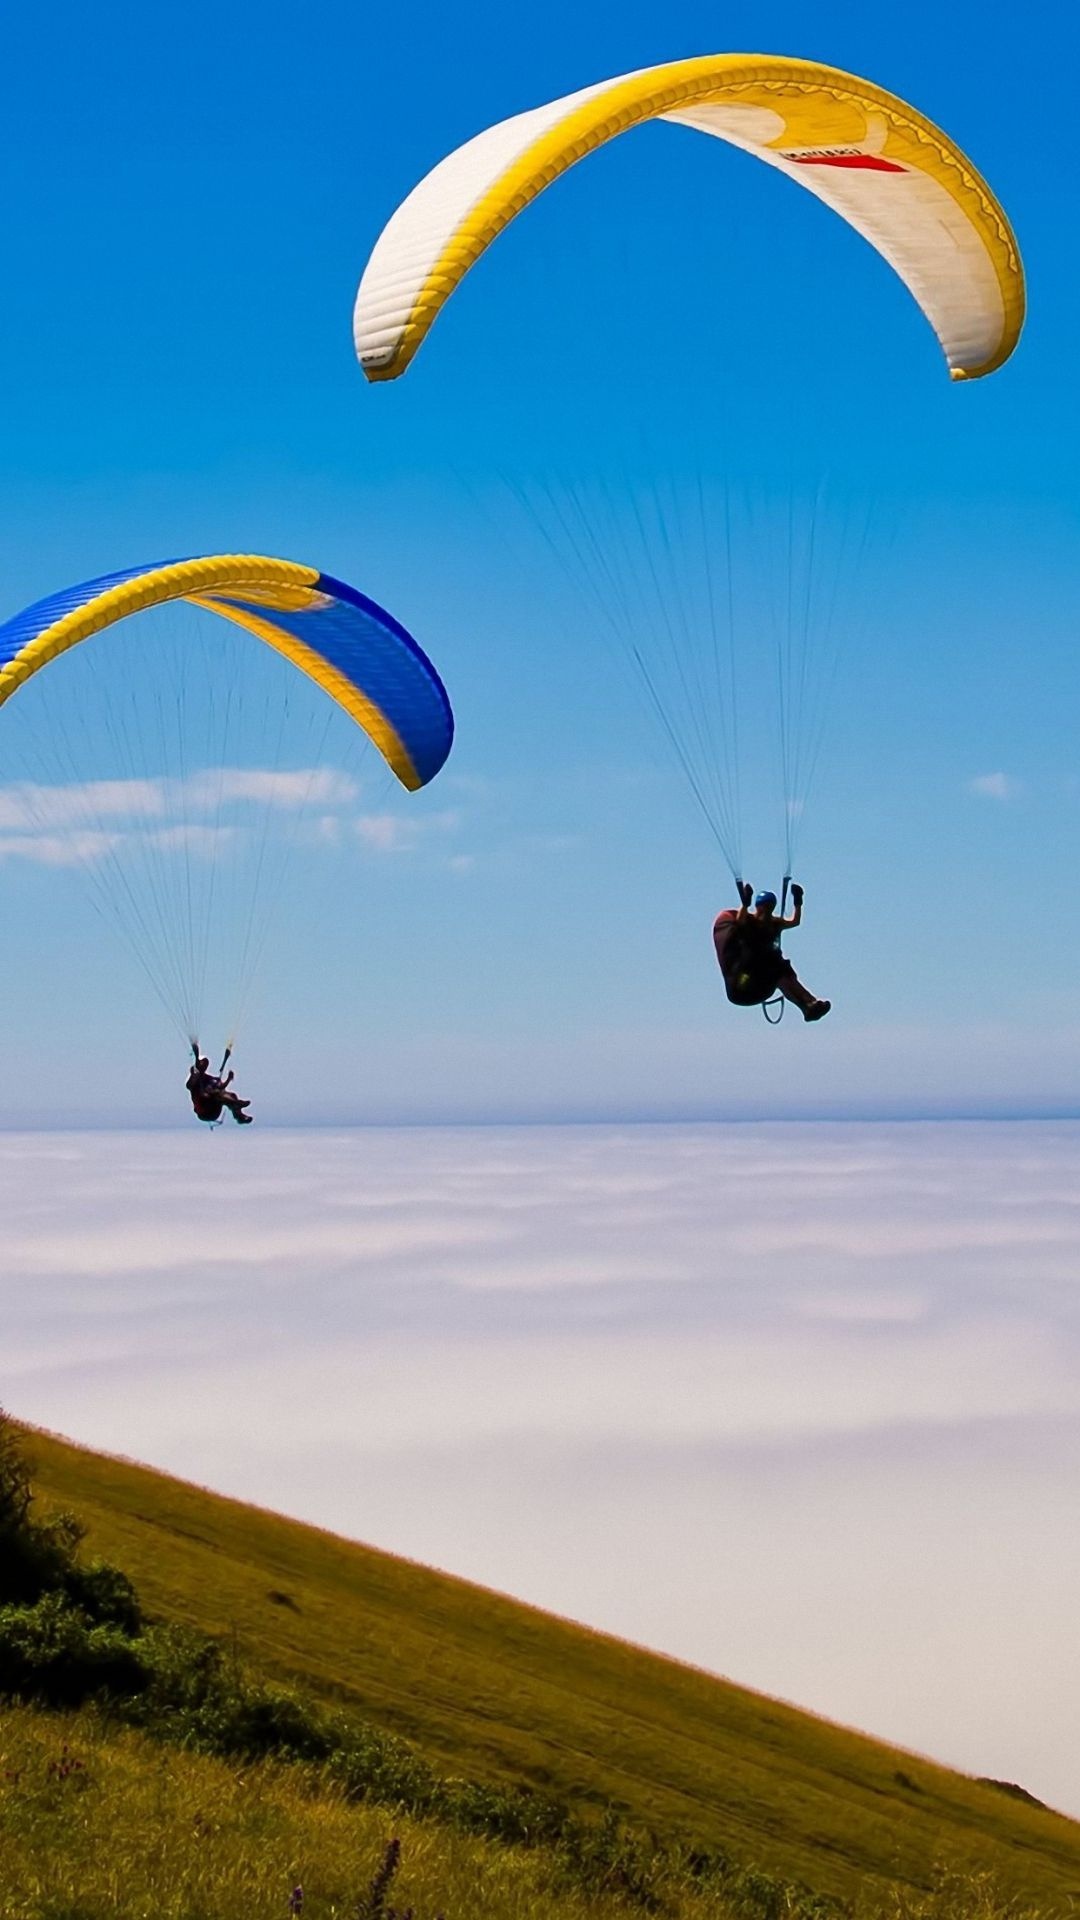 Paragliding: Pawn EVO paragliders, Ultralight aviation and extreme sport. 1080x1920 Full HD Wallpaper.